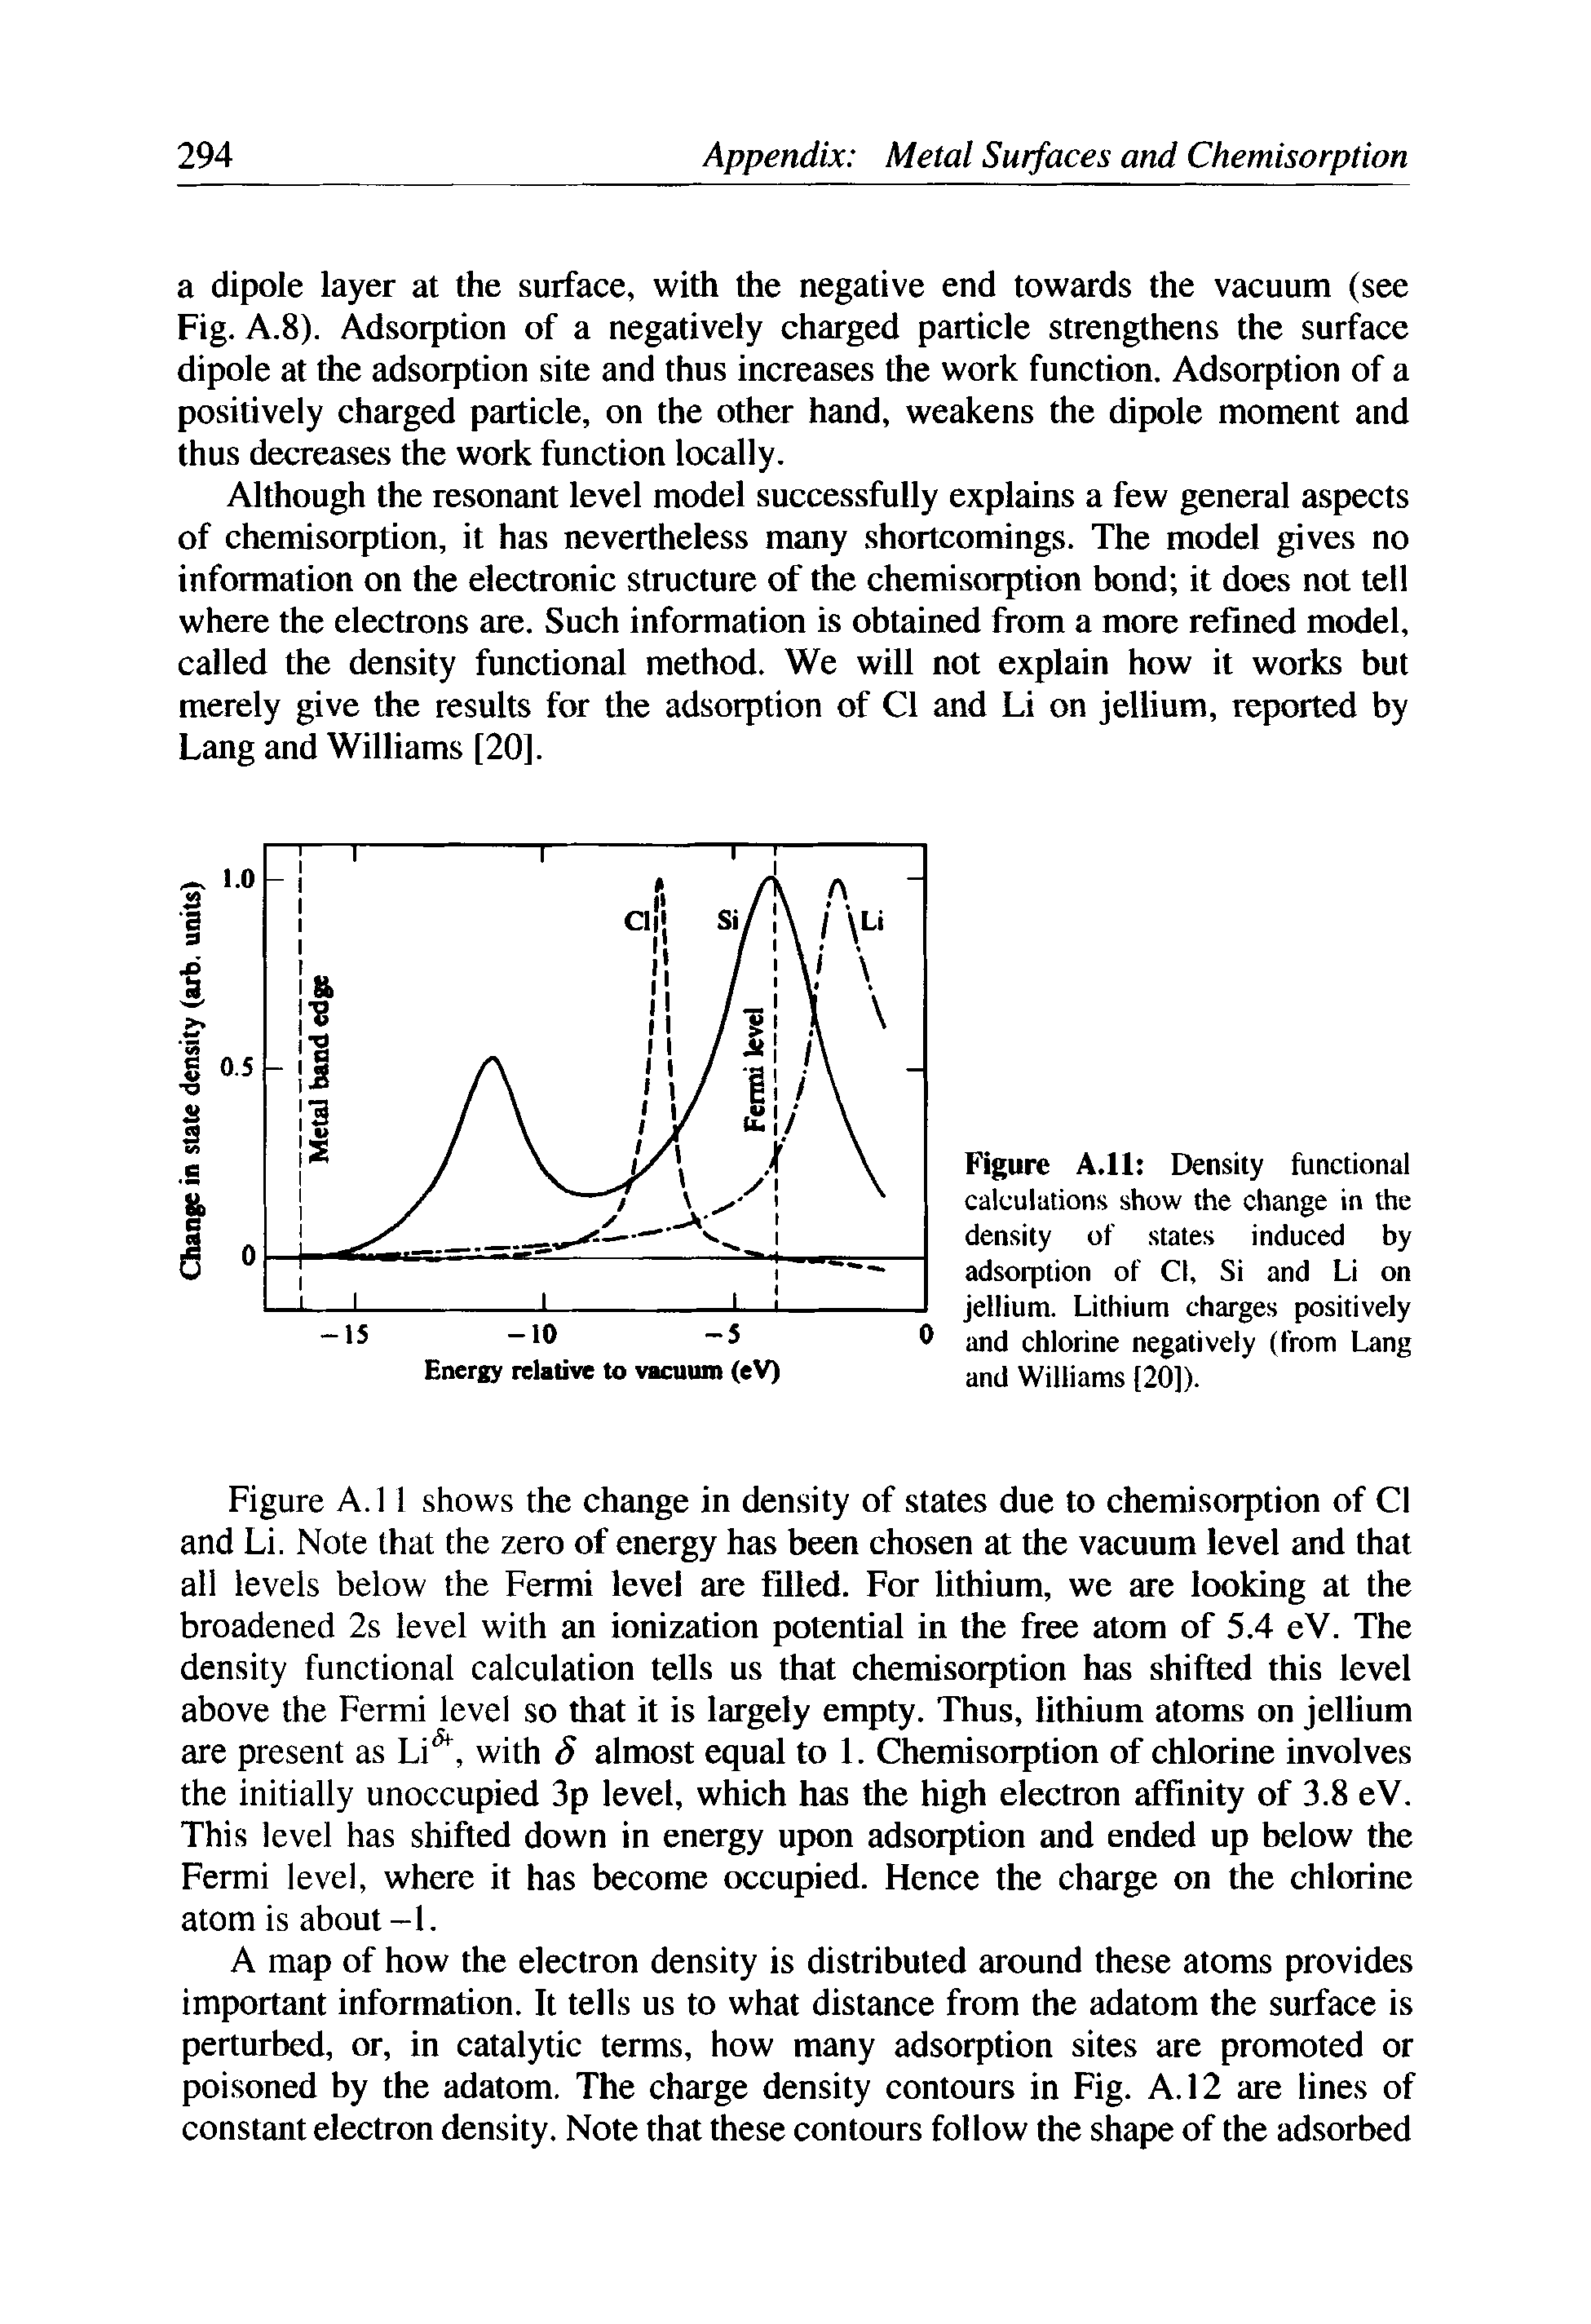 Figure A.l 1 shows the change in density of states due to chemisorption of Cl and Li. Note that the zero of energy has been chosen at the vacuum level and that all levels below the Fermi level are filled. For lithium, we are looking at the broadened 2s level with an ionization potential in the free atom of 5.4 eV. The density functional calculation tells us that chemisorption has shifted this level above the Fermi level so that it is largely empty. Thus, lithium atoms on jellium are present as Li, with 8 almost equal to 1. Chemisorption of chlorine involves the initially unoccupied 3p level, which has the high electron affinity of 3.8 eV. This level has shifted down in energy upon adsorption and ended up below the Fermi level, where it has become occupied. Hence the charge on the chlorine atom is about-1.